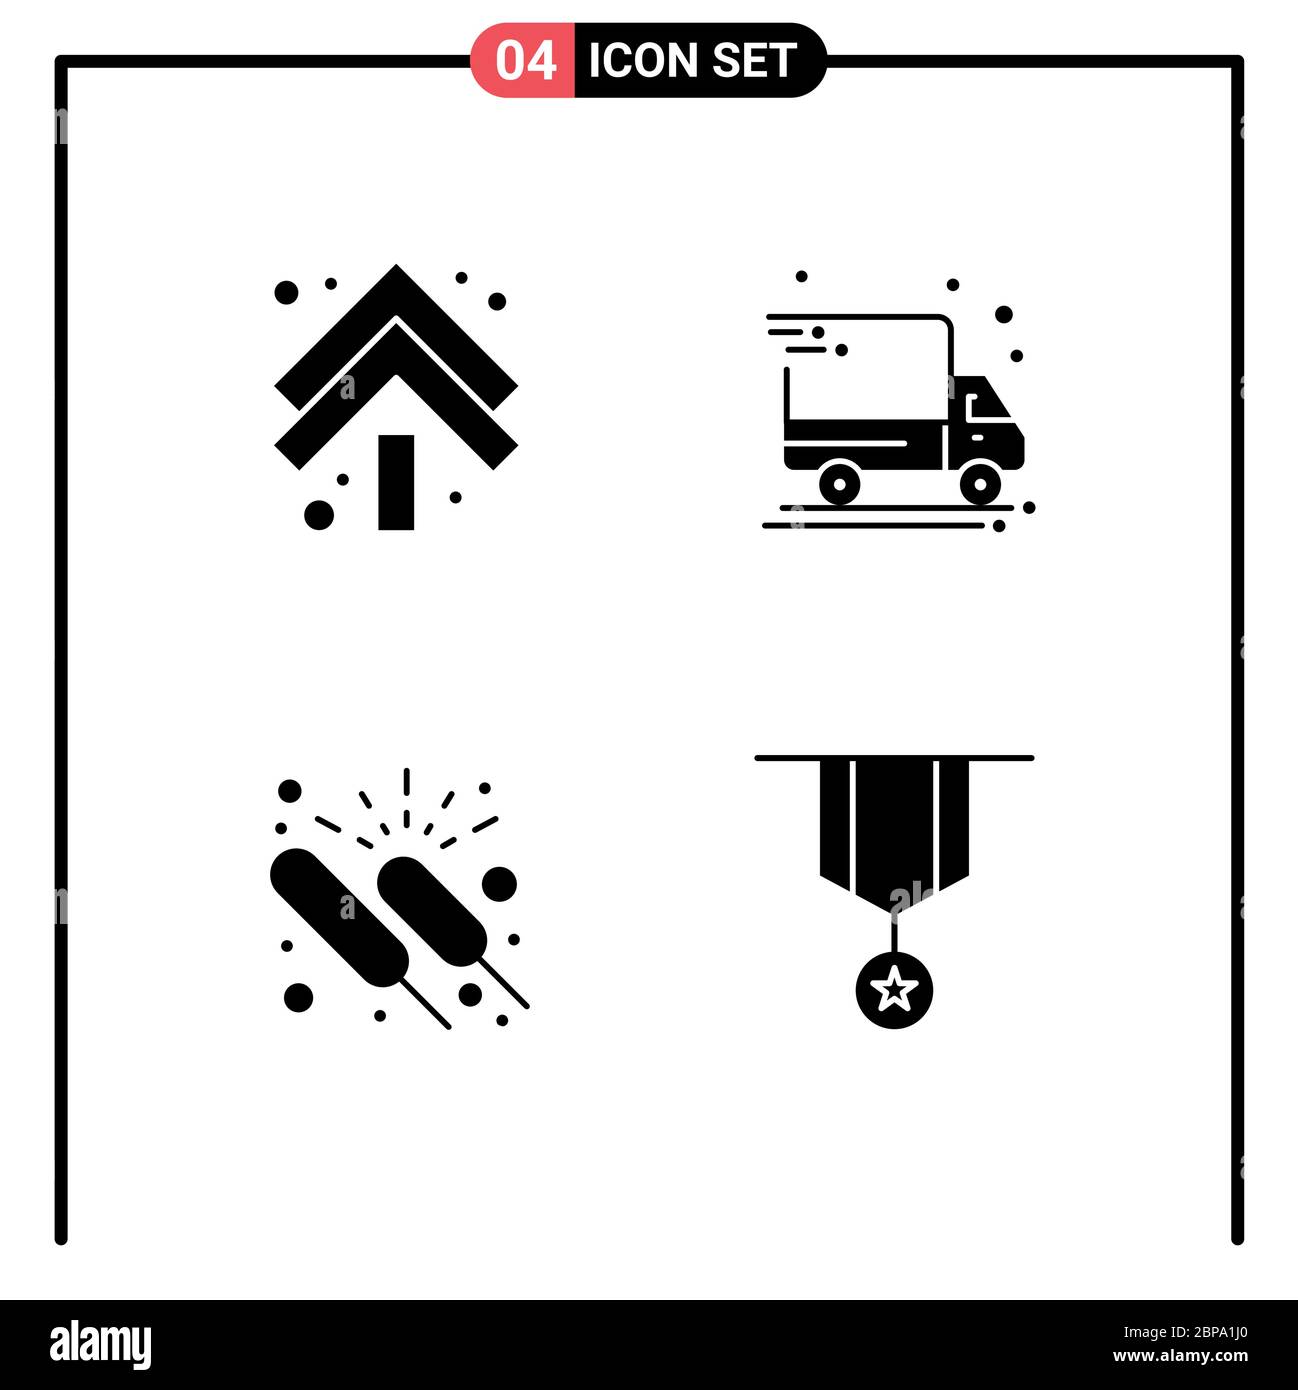 https://c8.alamy.com/comp/2BPA1J0/set-of-4-modern-ui-icons-symbols-signs-for-arrow-fireworks-double-package-delivery-night-editable-vector-design-elements-2BPA1J0.jpg